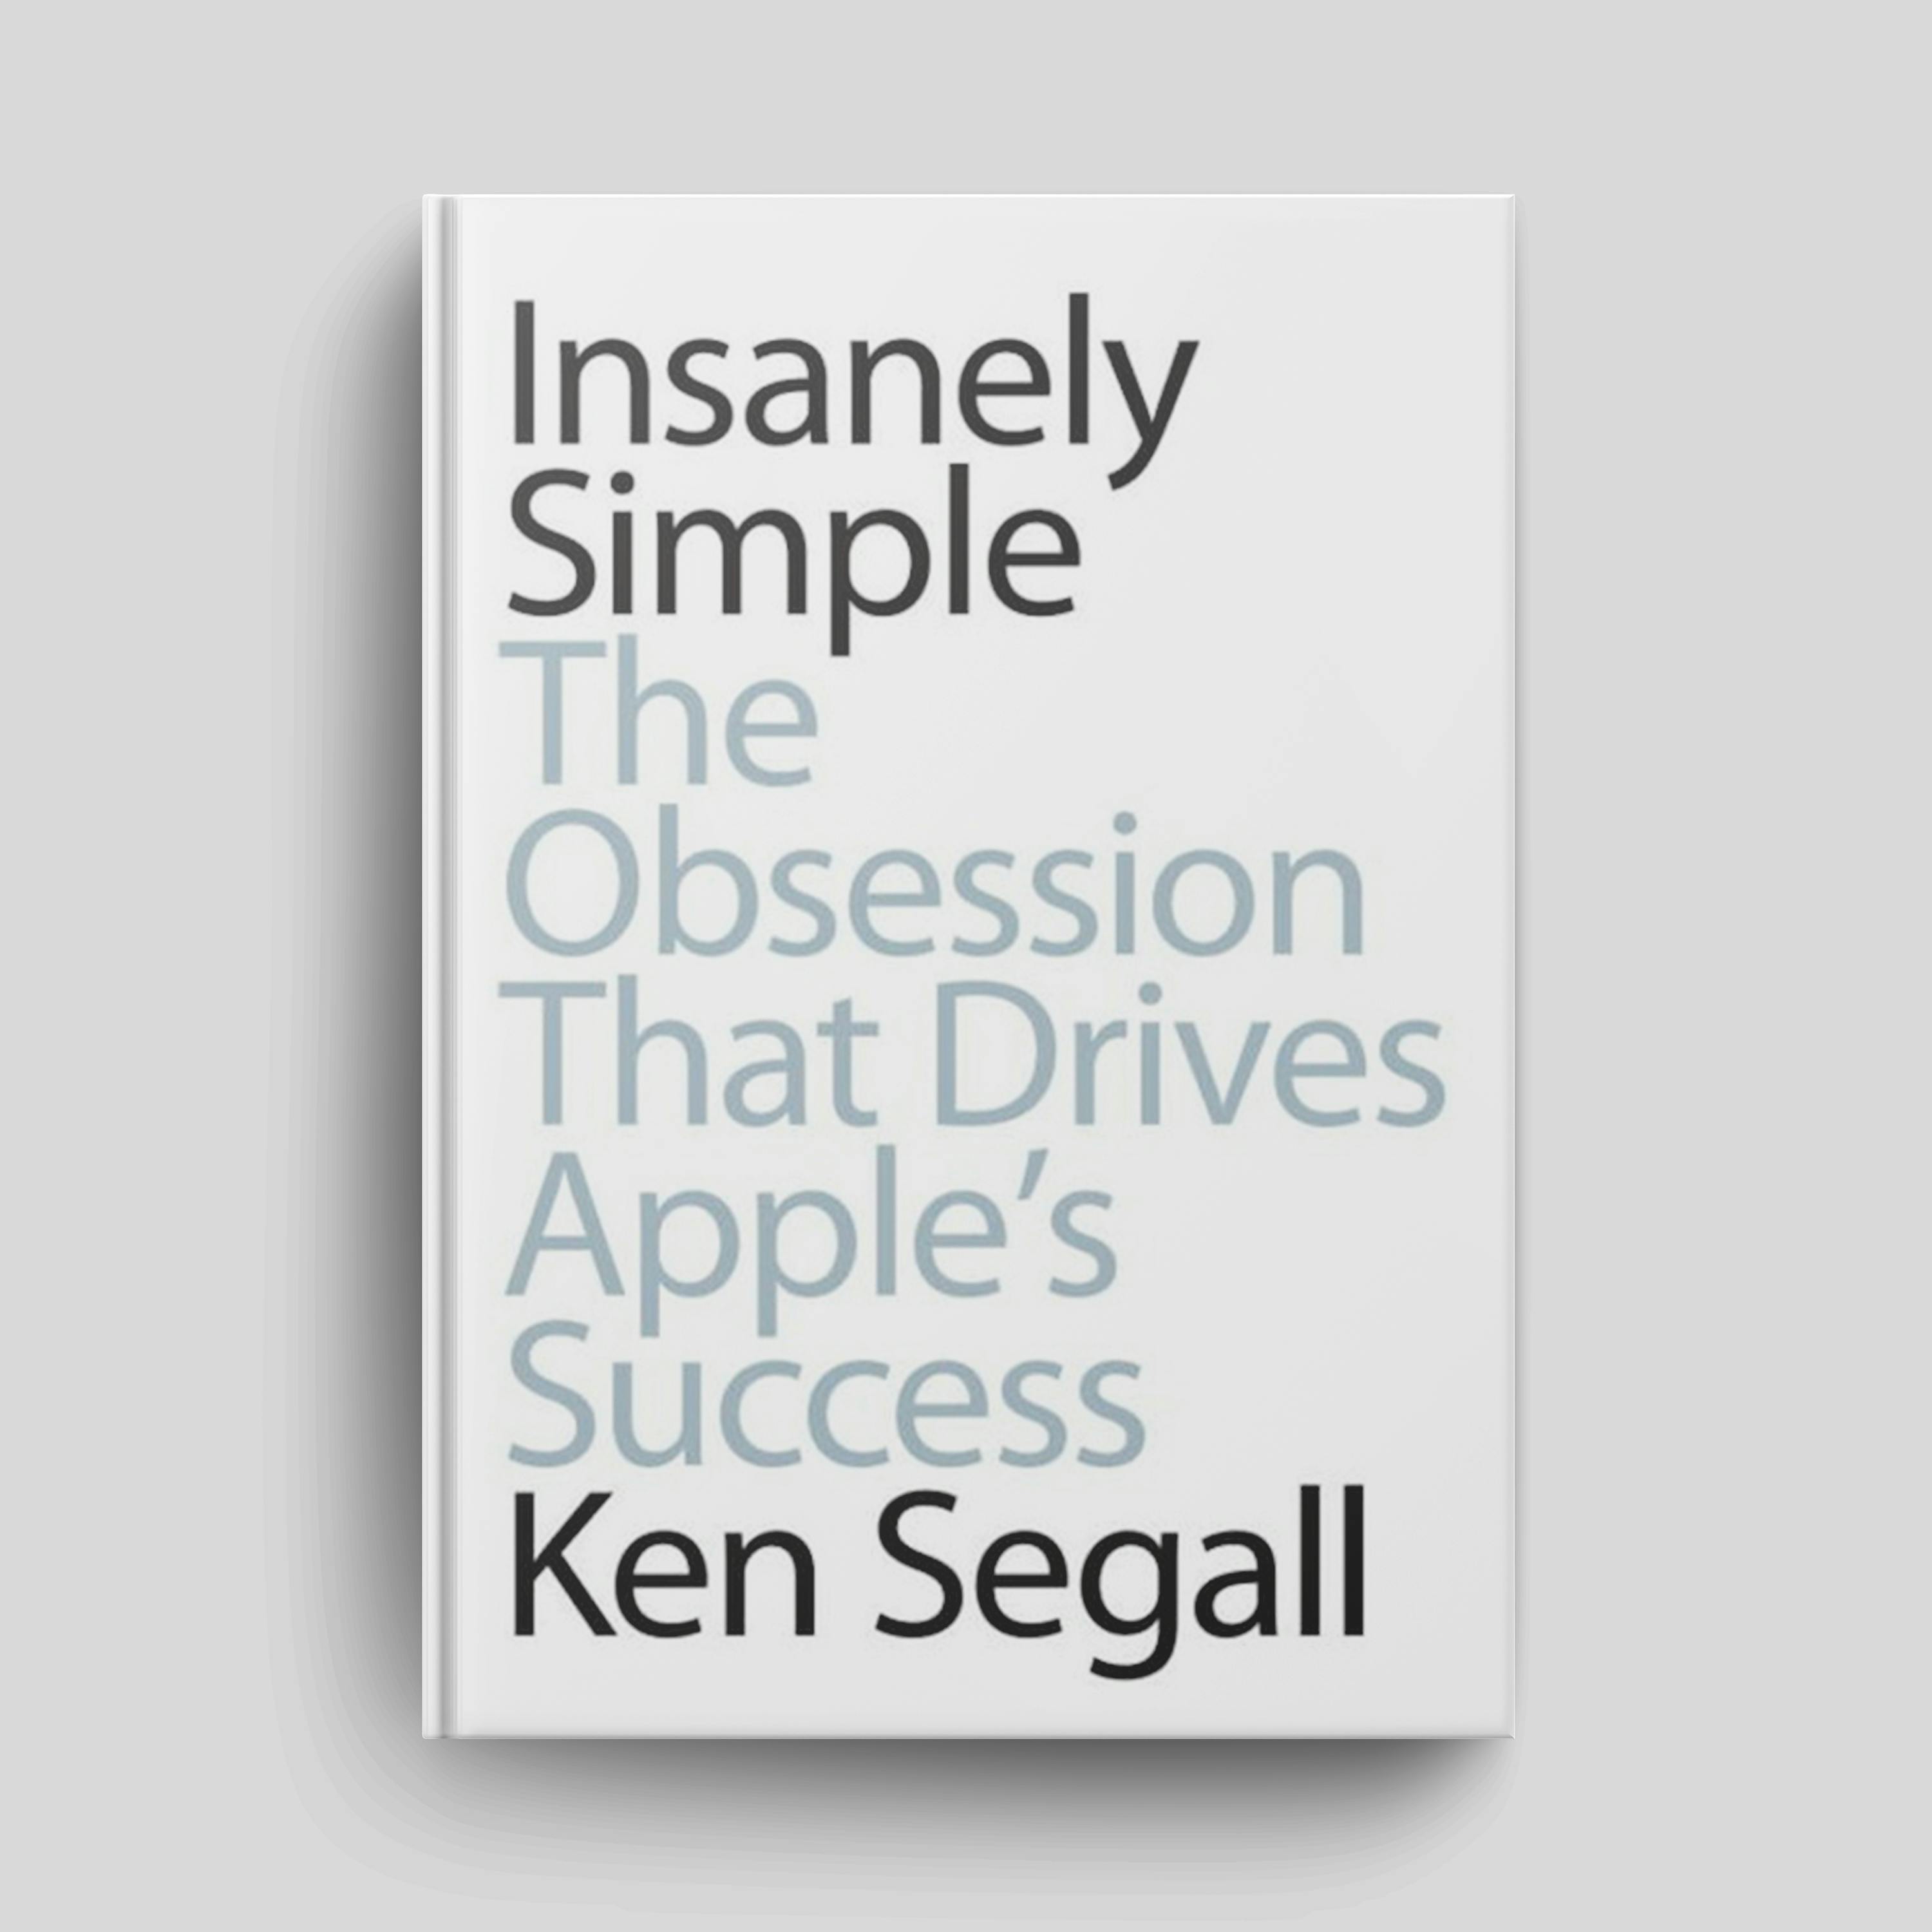 Book: (Part 2) "Insanely Simple: The Obsession That Drives Apple's Success" | Episode #175 (Part 2 of 2)